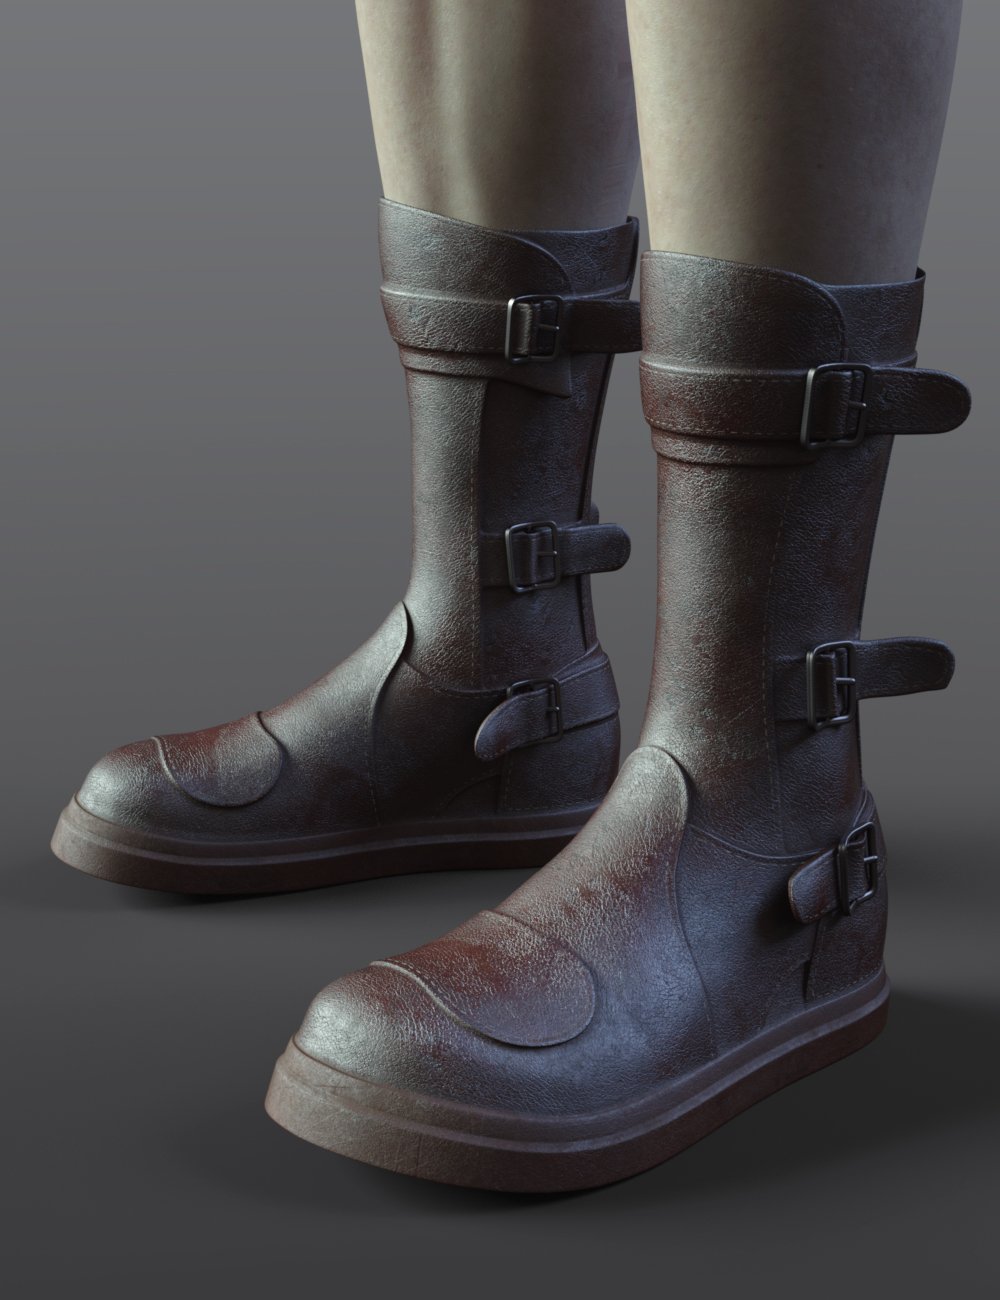 HA Shoes for Genesis 8.1 Females by: Sprite, 3D Models by Daz 3D